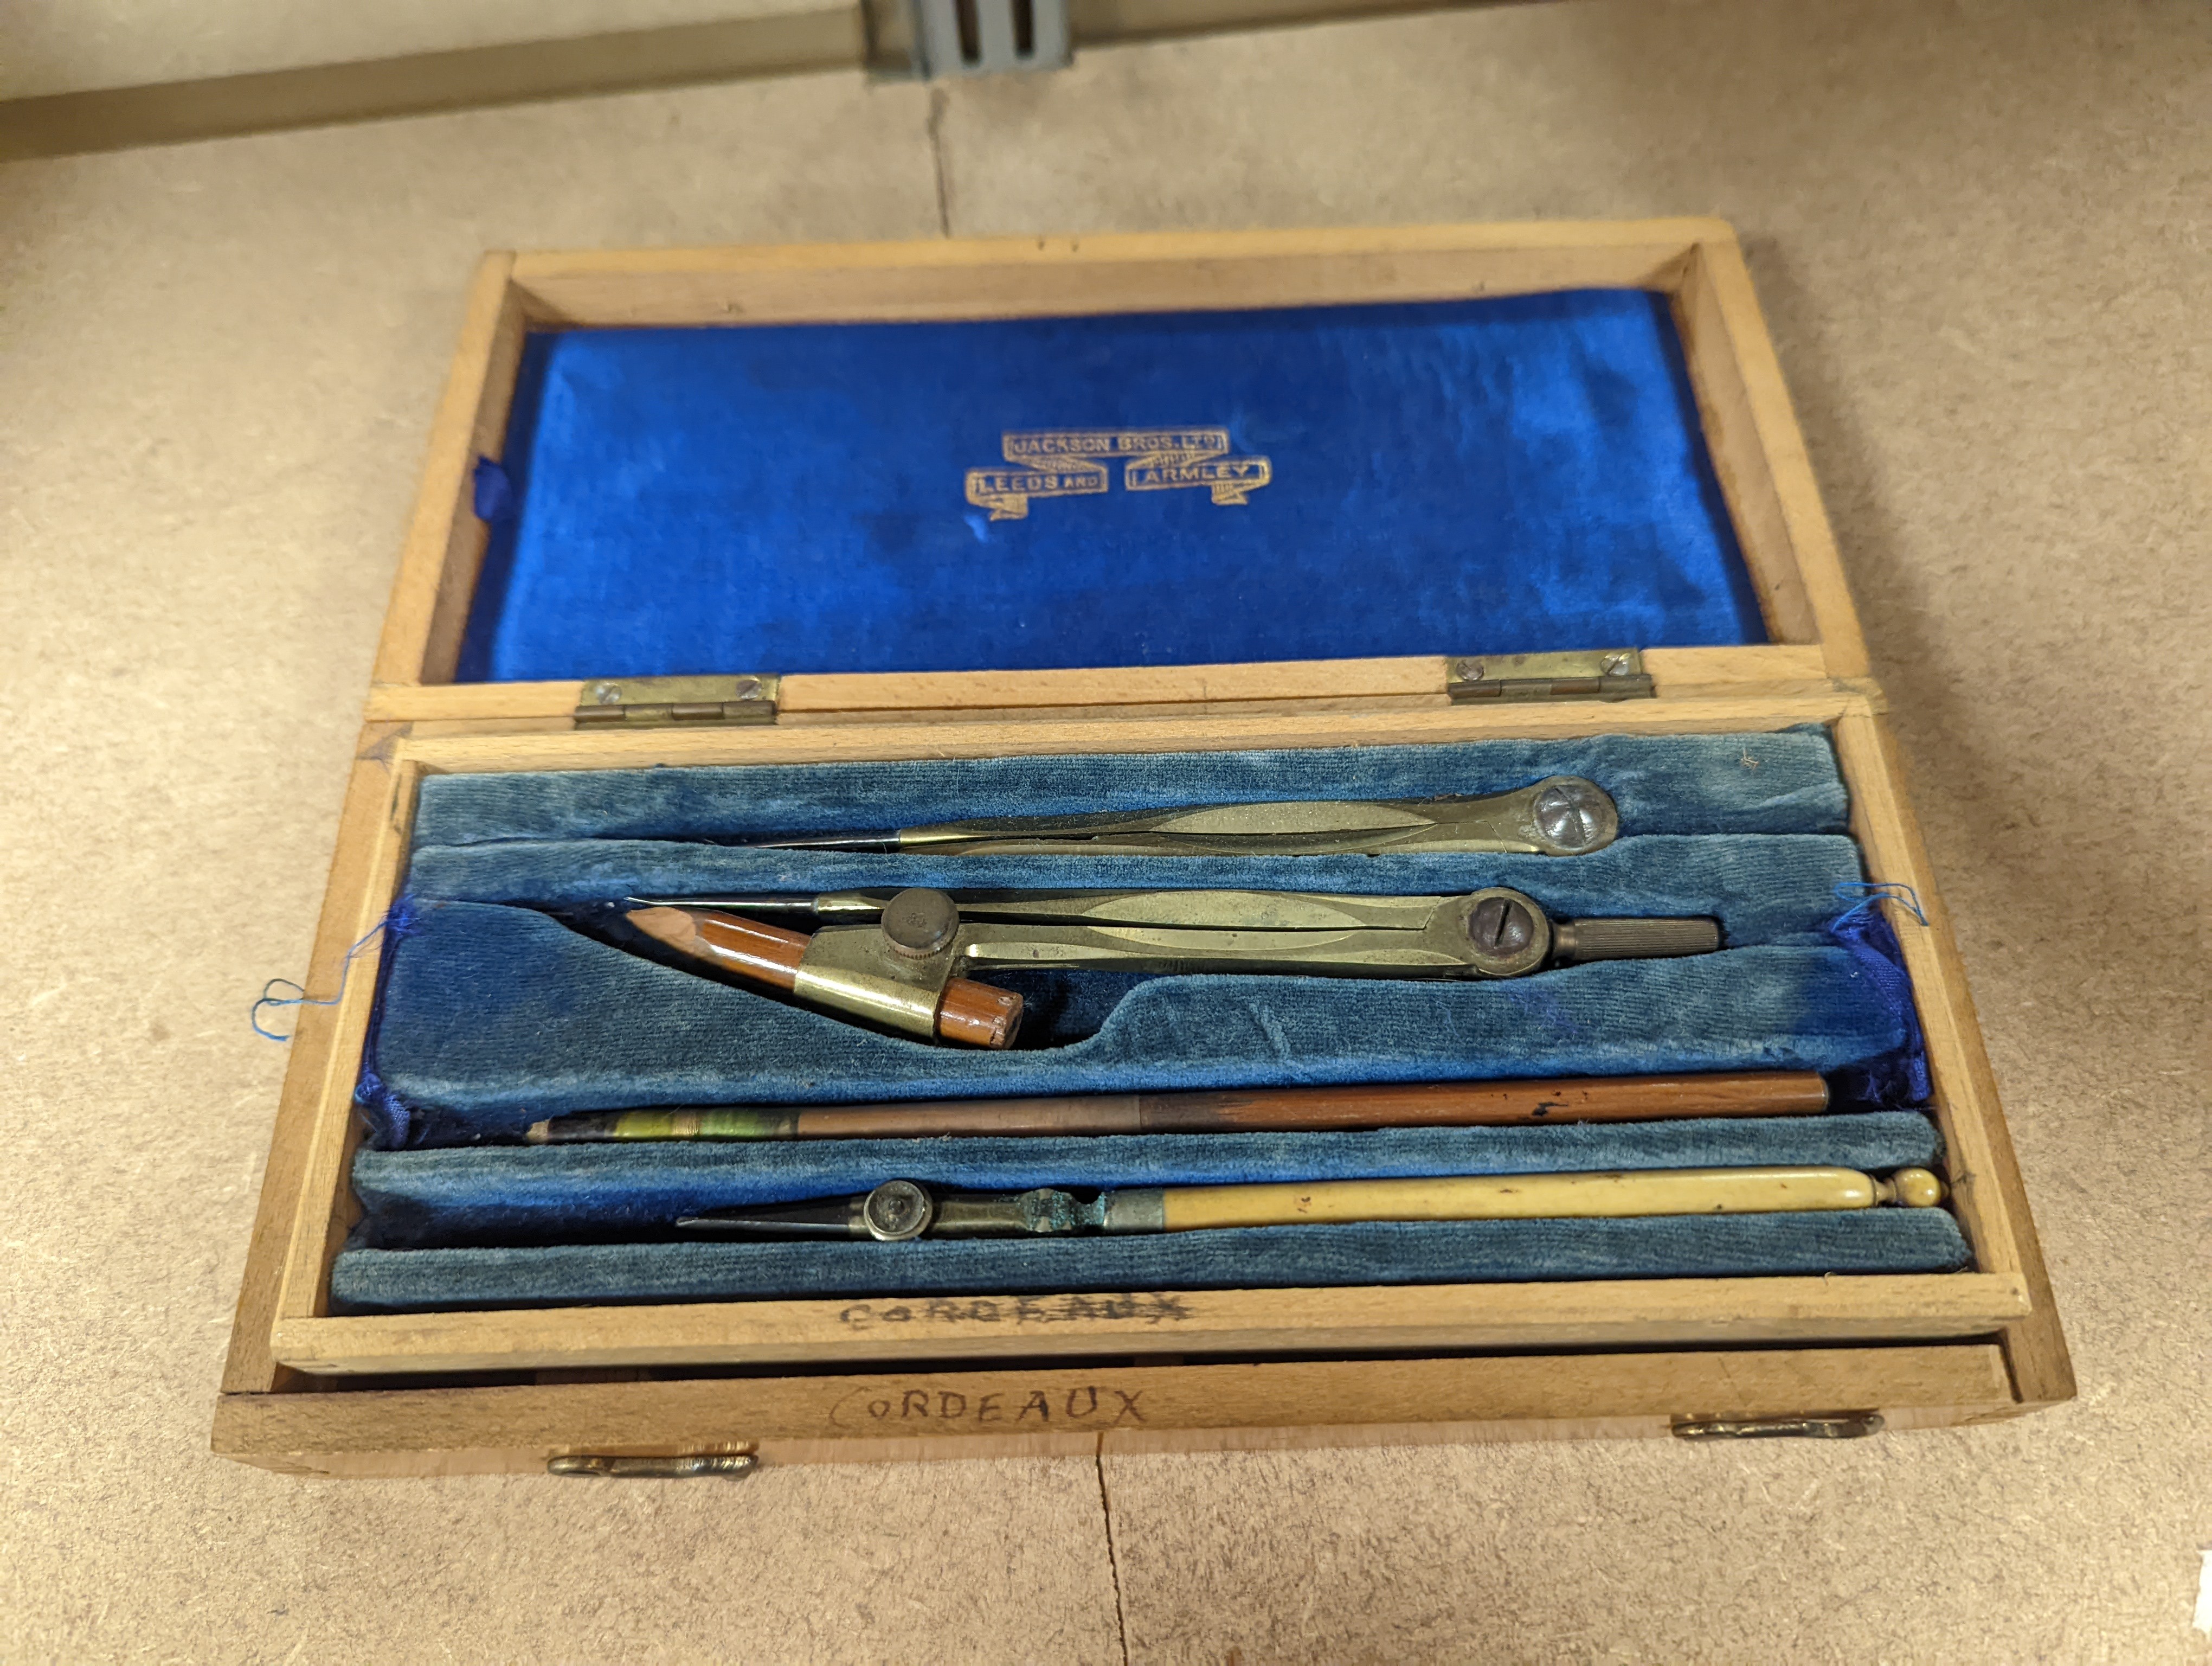 A collection of mahogany cased drawing instruments (8)